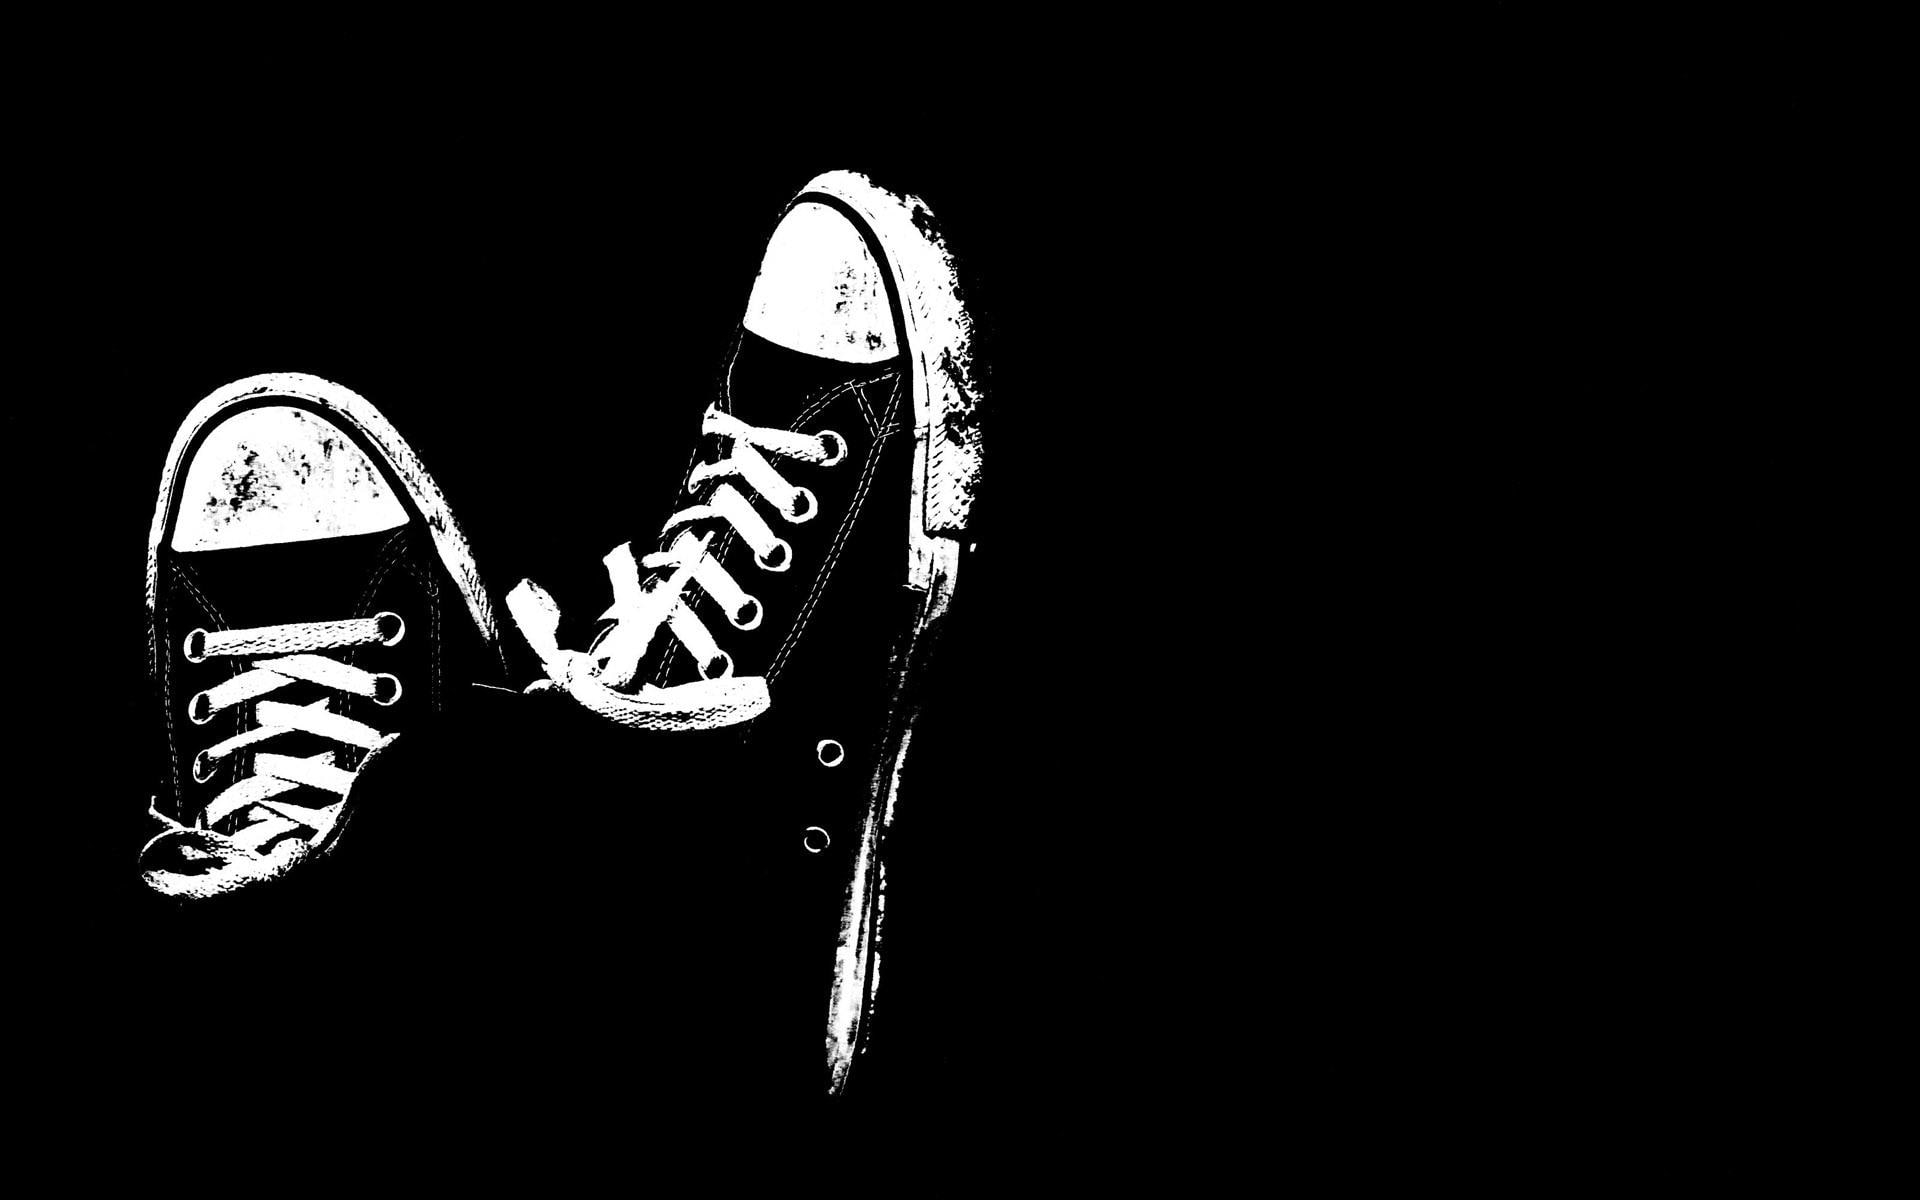 Black and white sneakers wallpaper, black and white converse all star low top sneakers, black and white converse all star low top sneakers, Empty